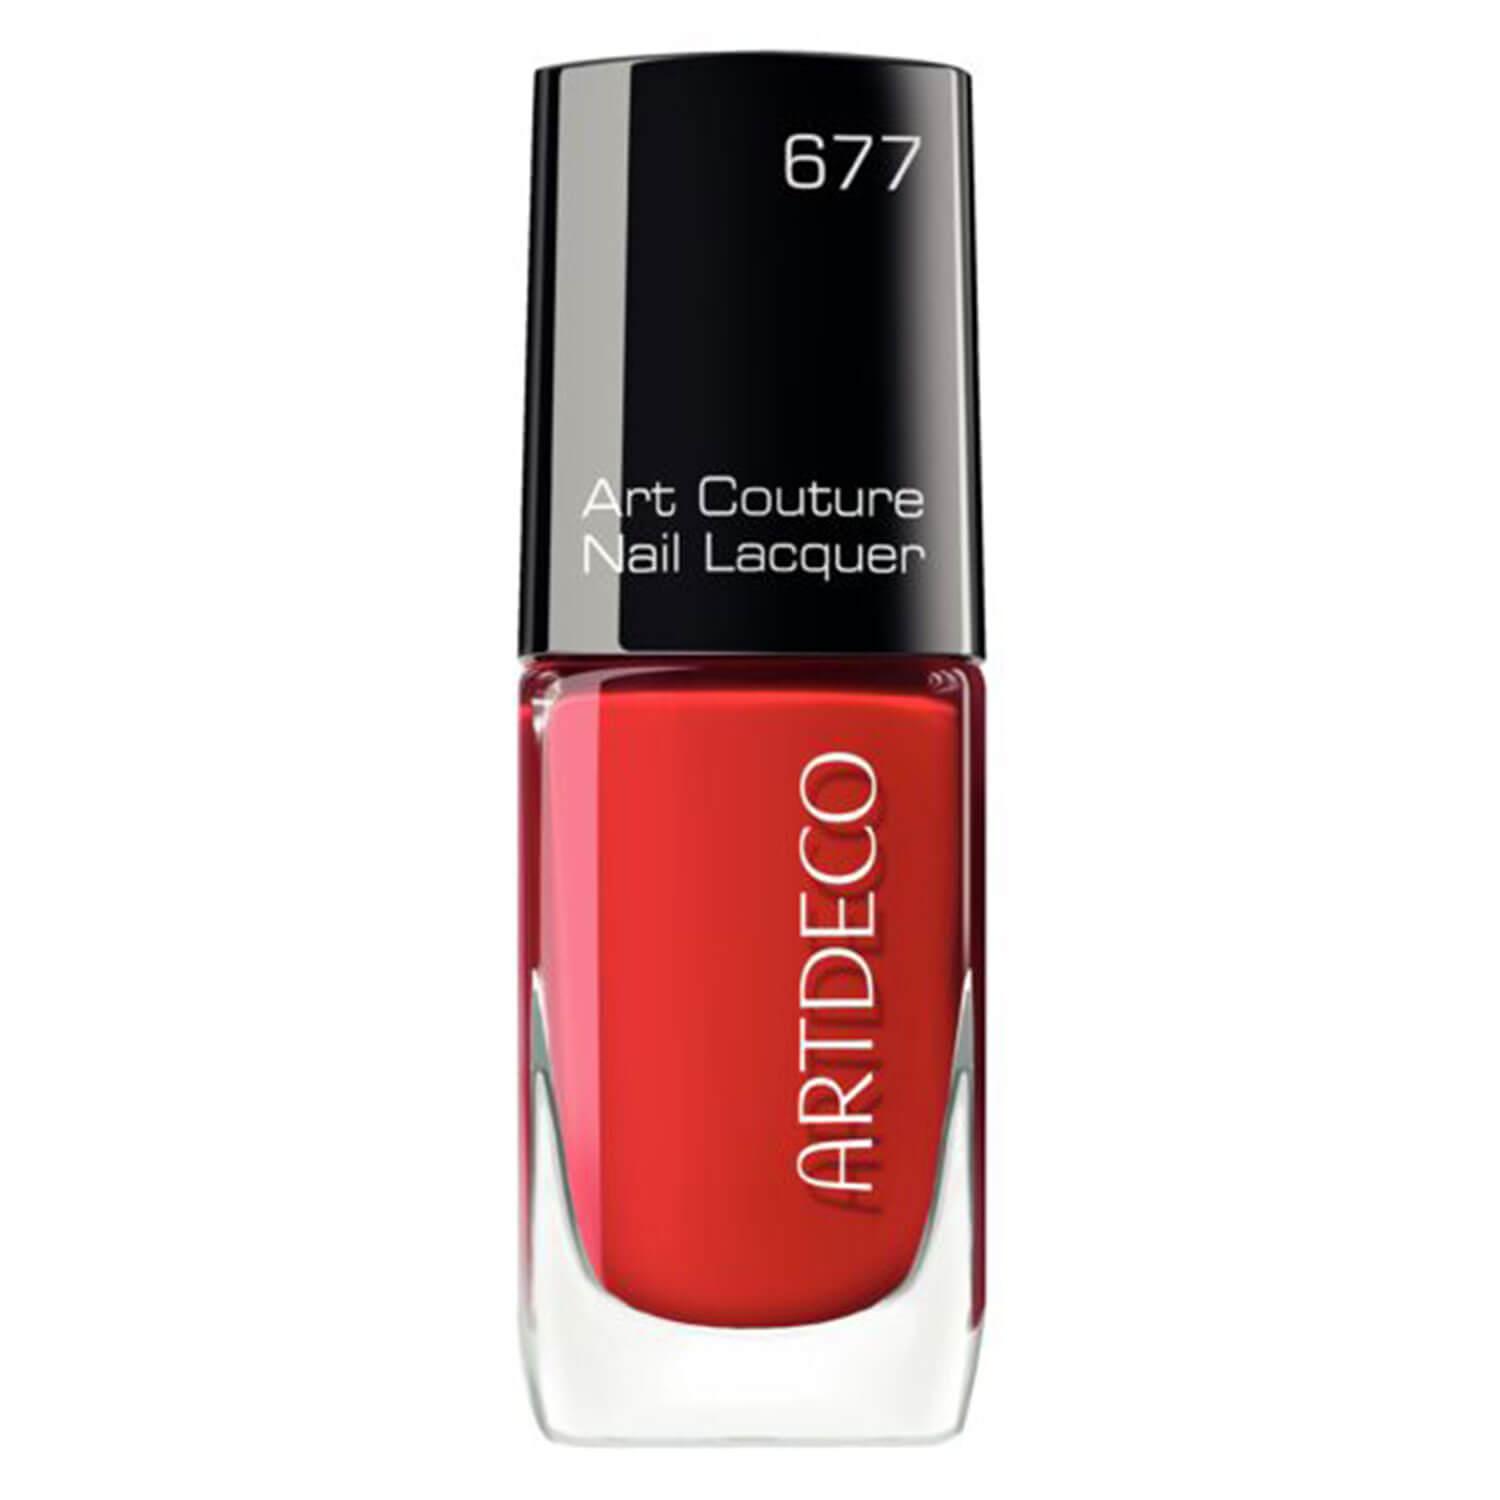 Art Couture - Nail Lacquer Love 677